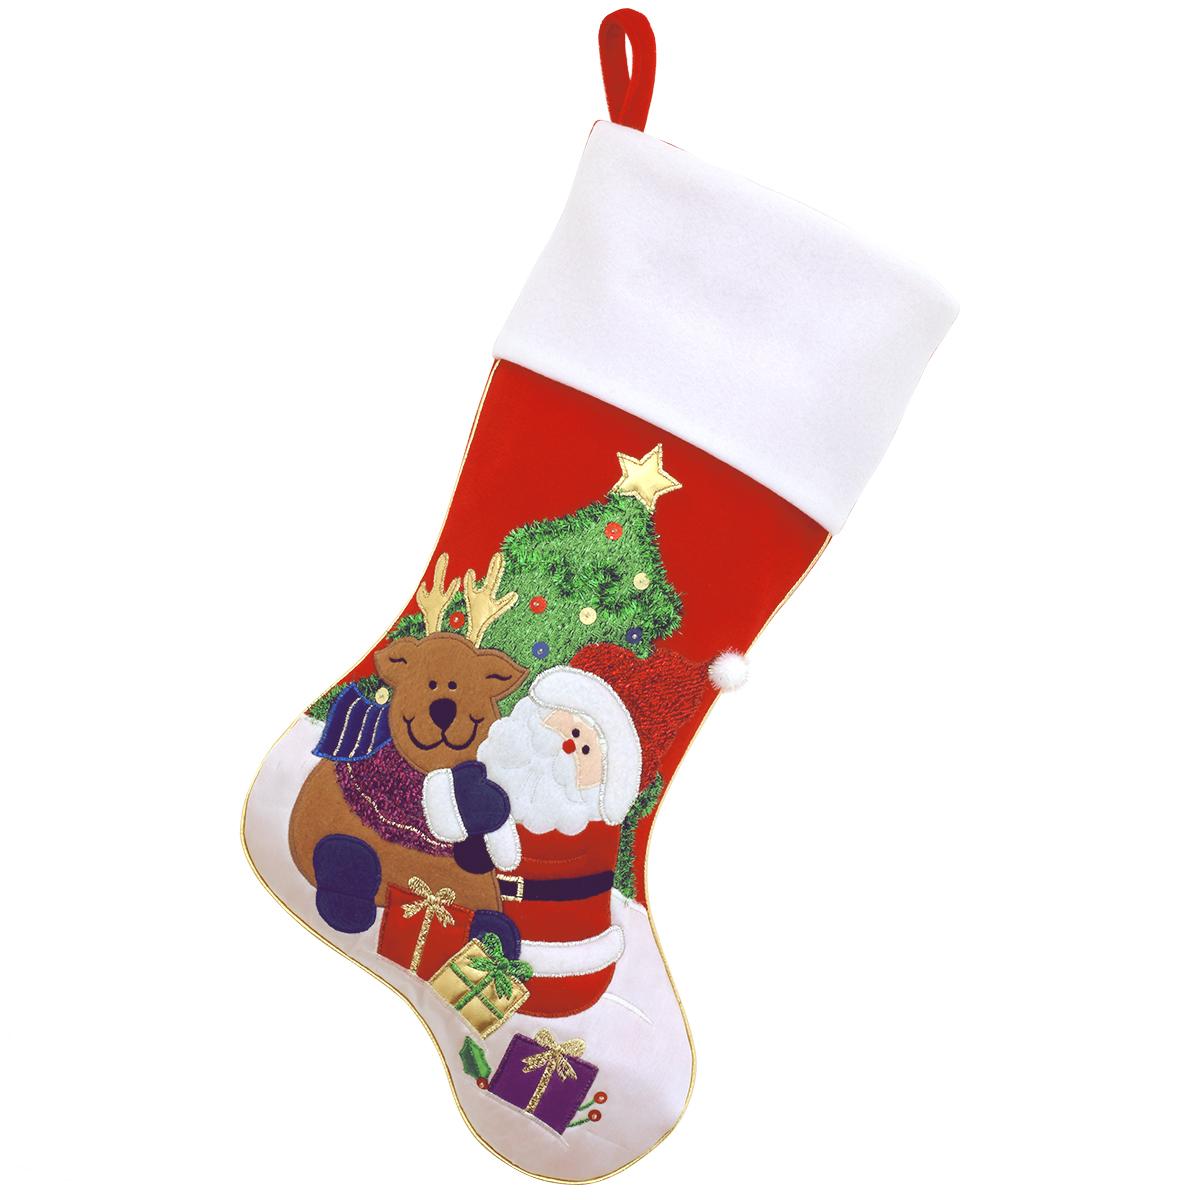 Alternate image showing Santa and reindeer in front of a Christmas tree on a red velvet stocking with white cuff without personalization.